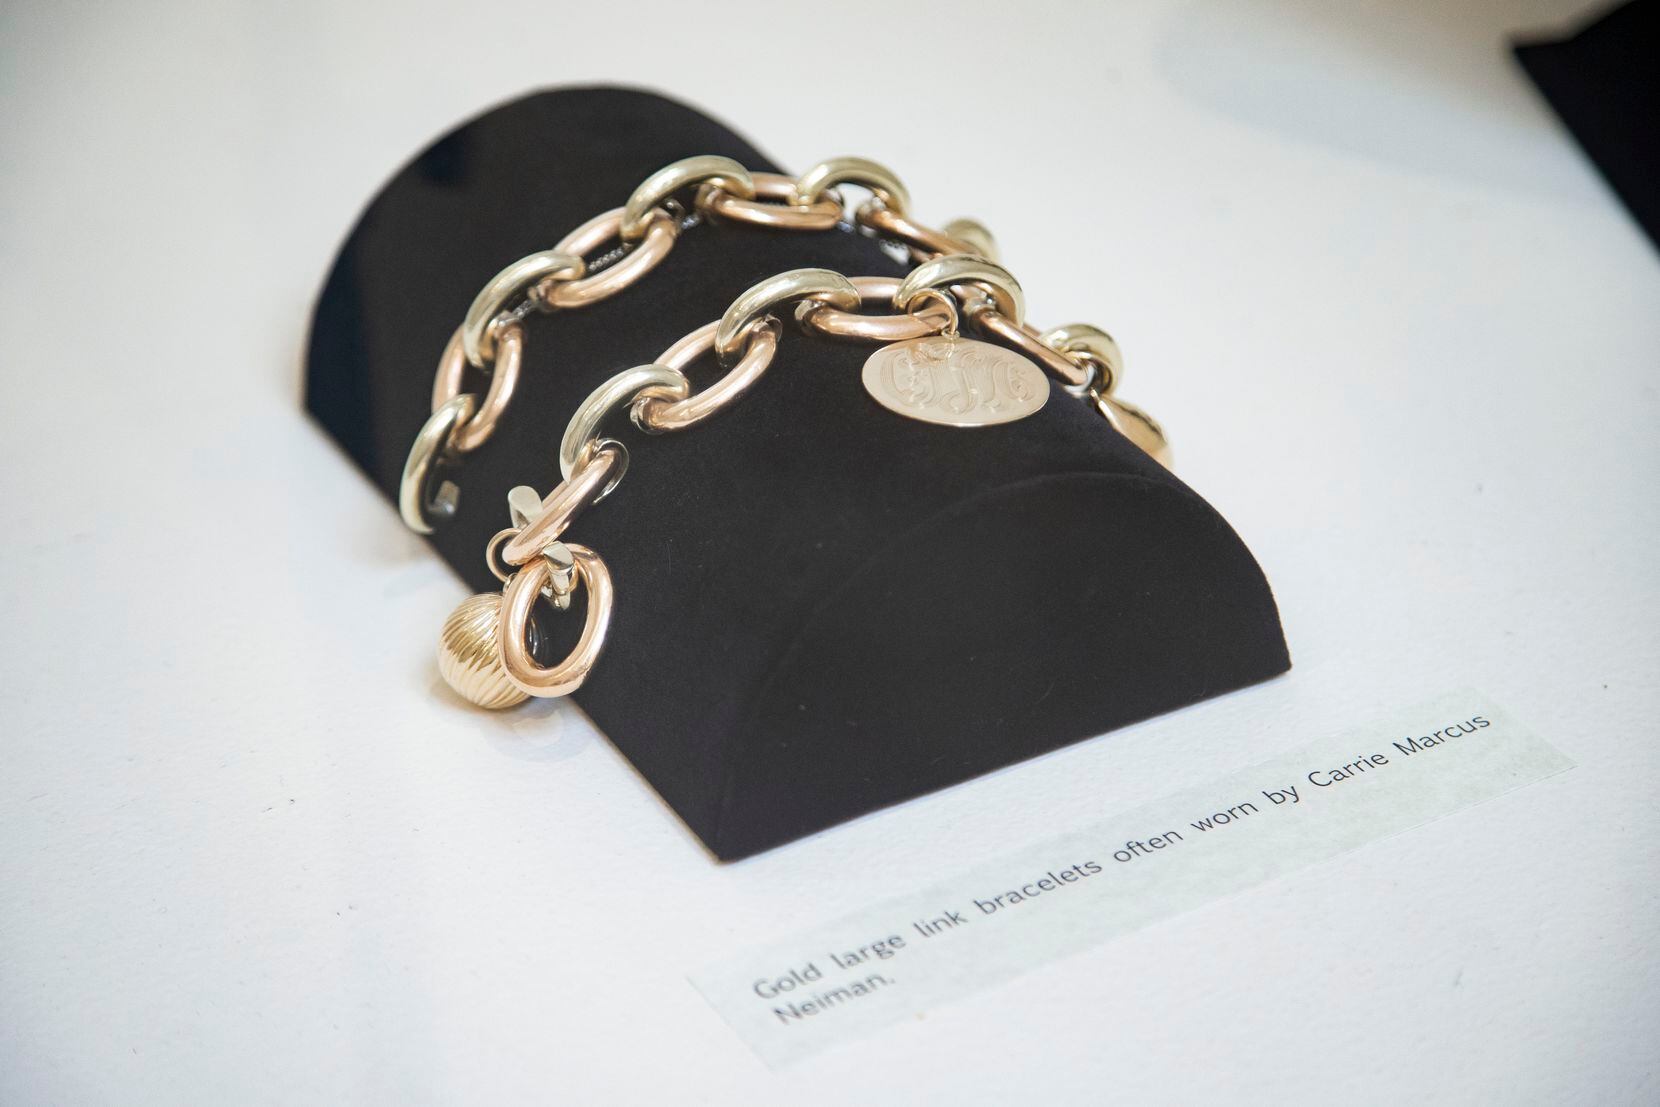 Carrie Marcus Neiman's gold large link bracelets on display in “An Eye for Elegance."